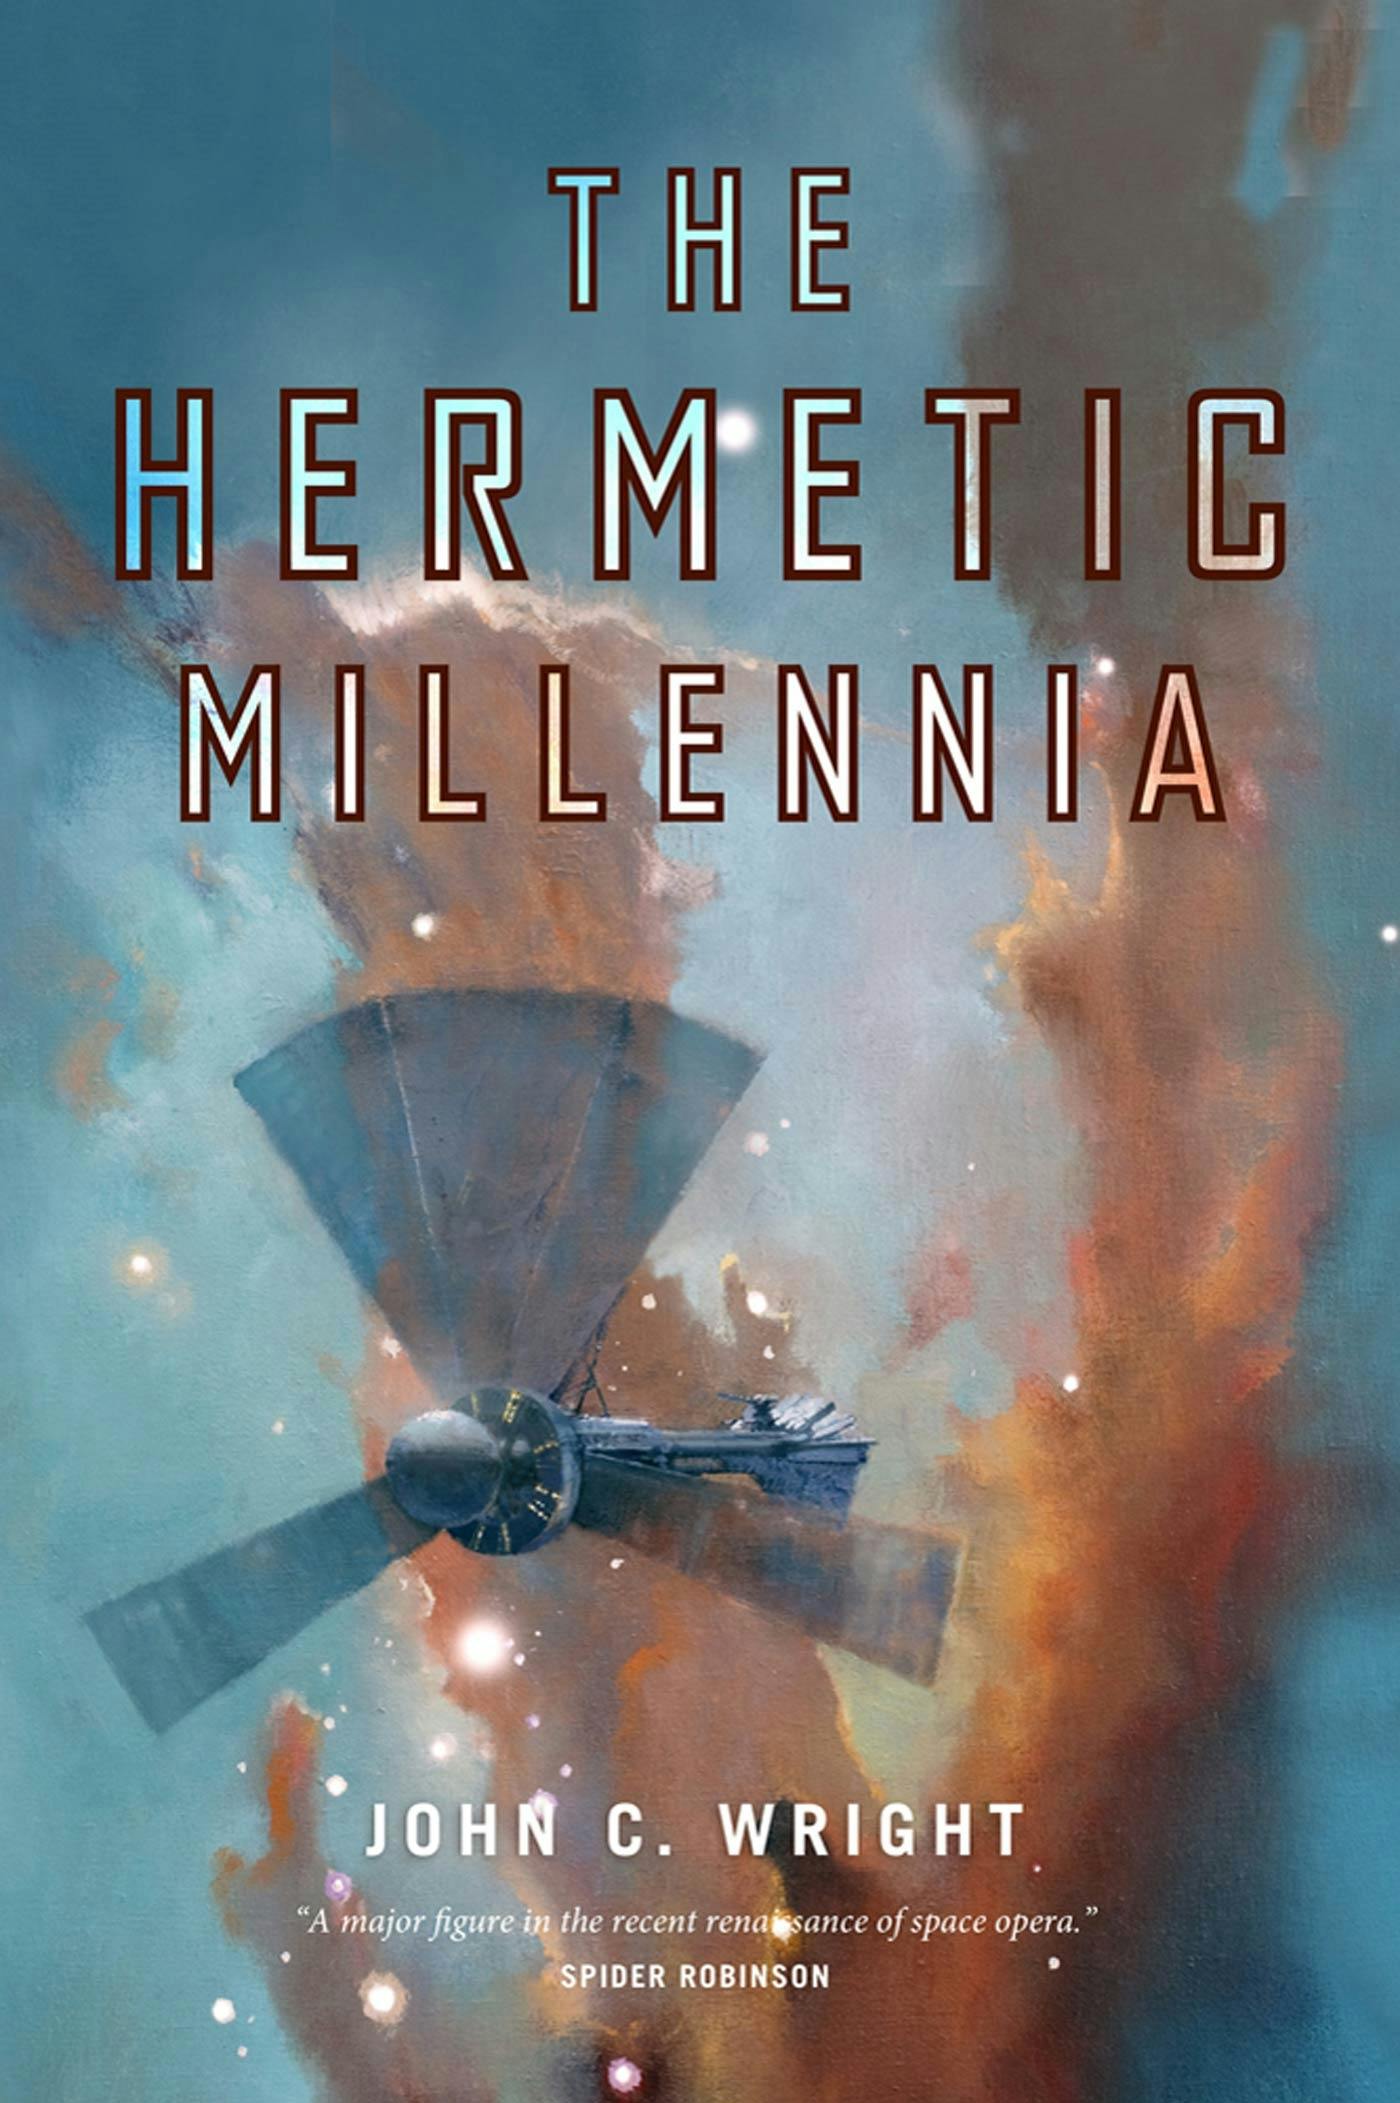 Cover for the book titled as: The Hermetic Millennia